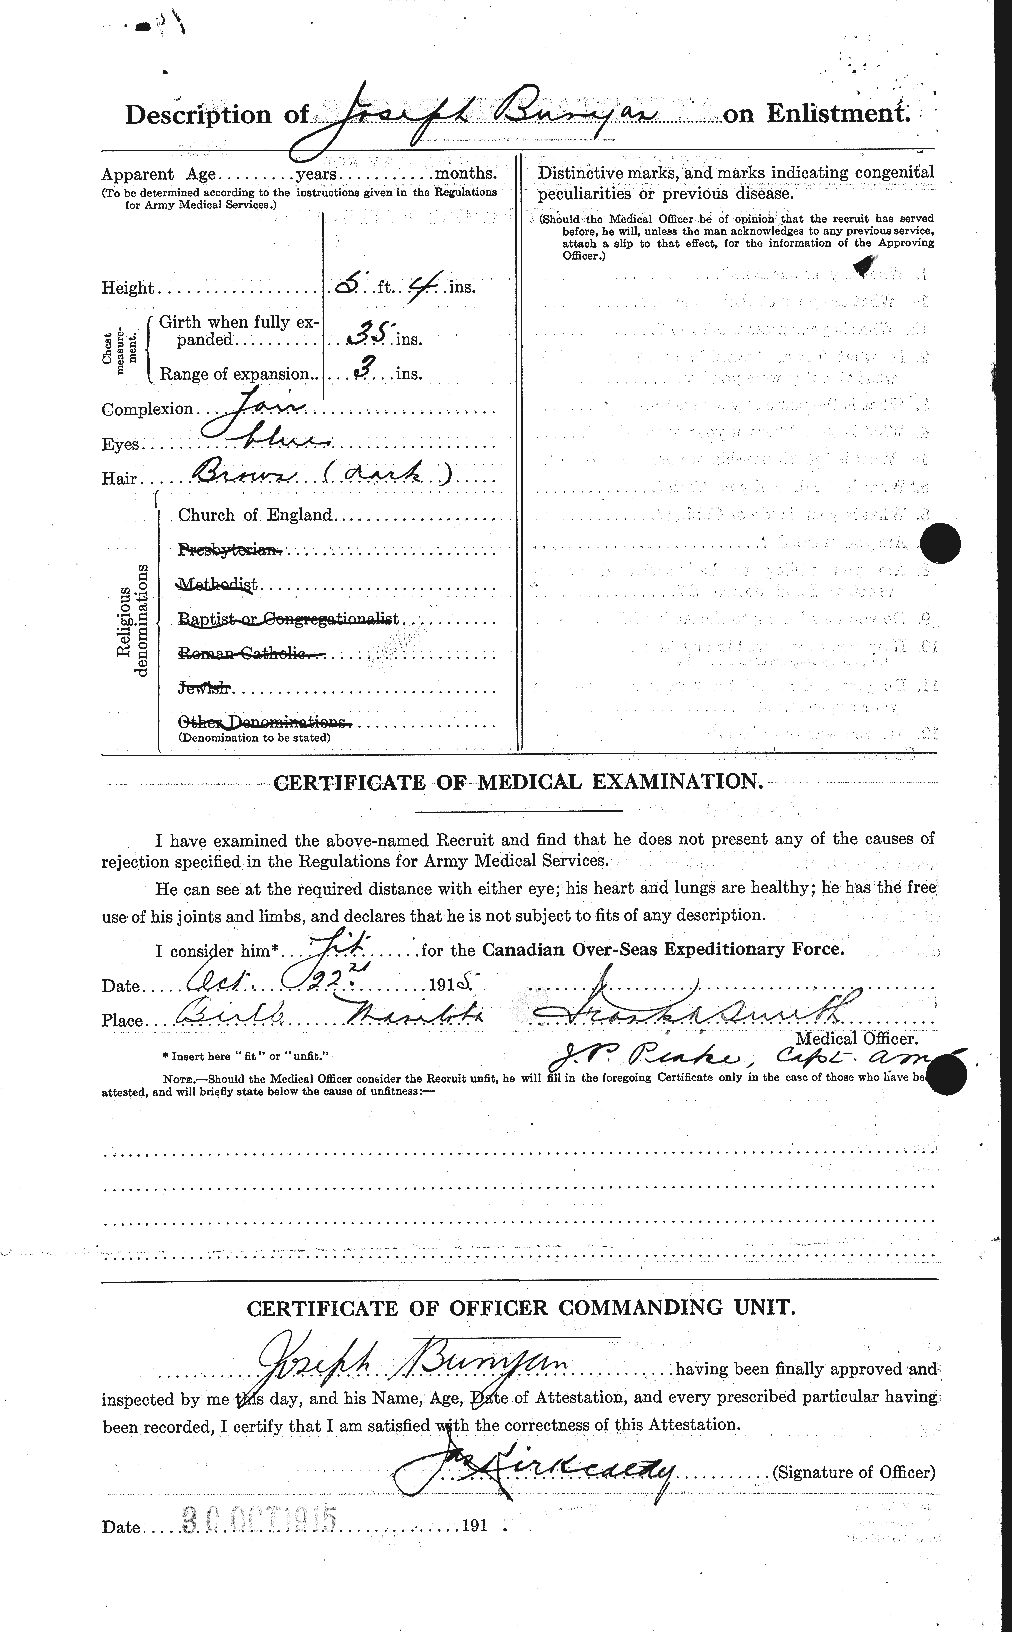 Personnel Records of the First World War - CEF 270994b